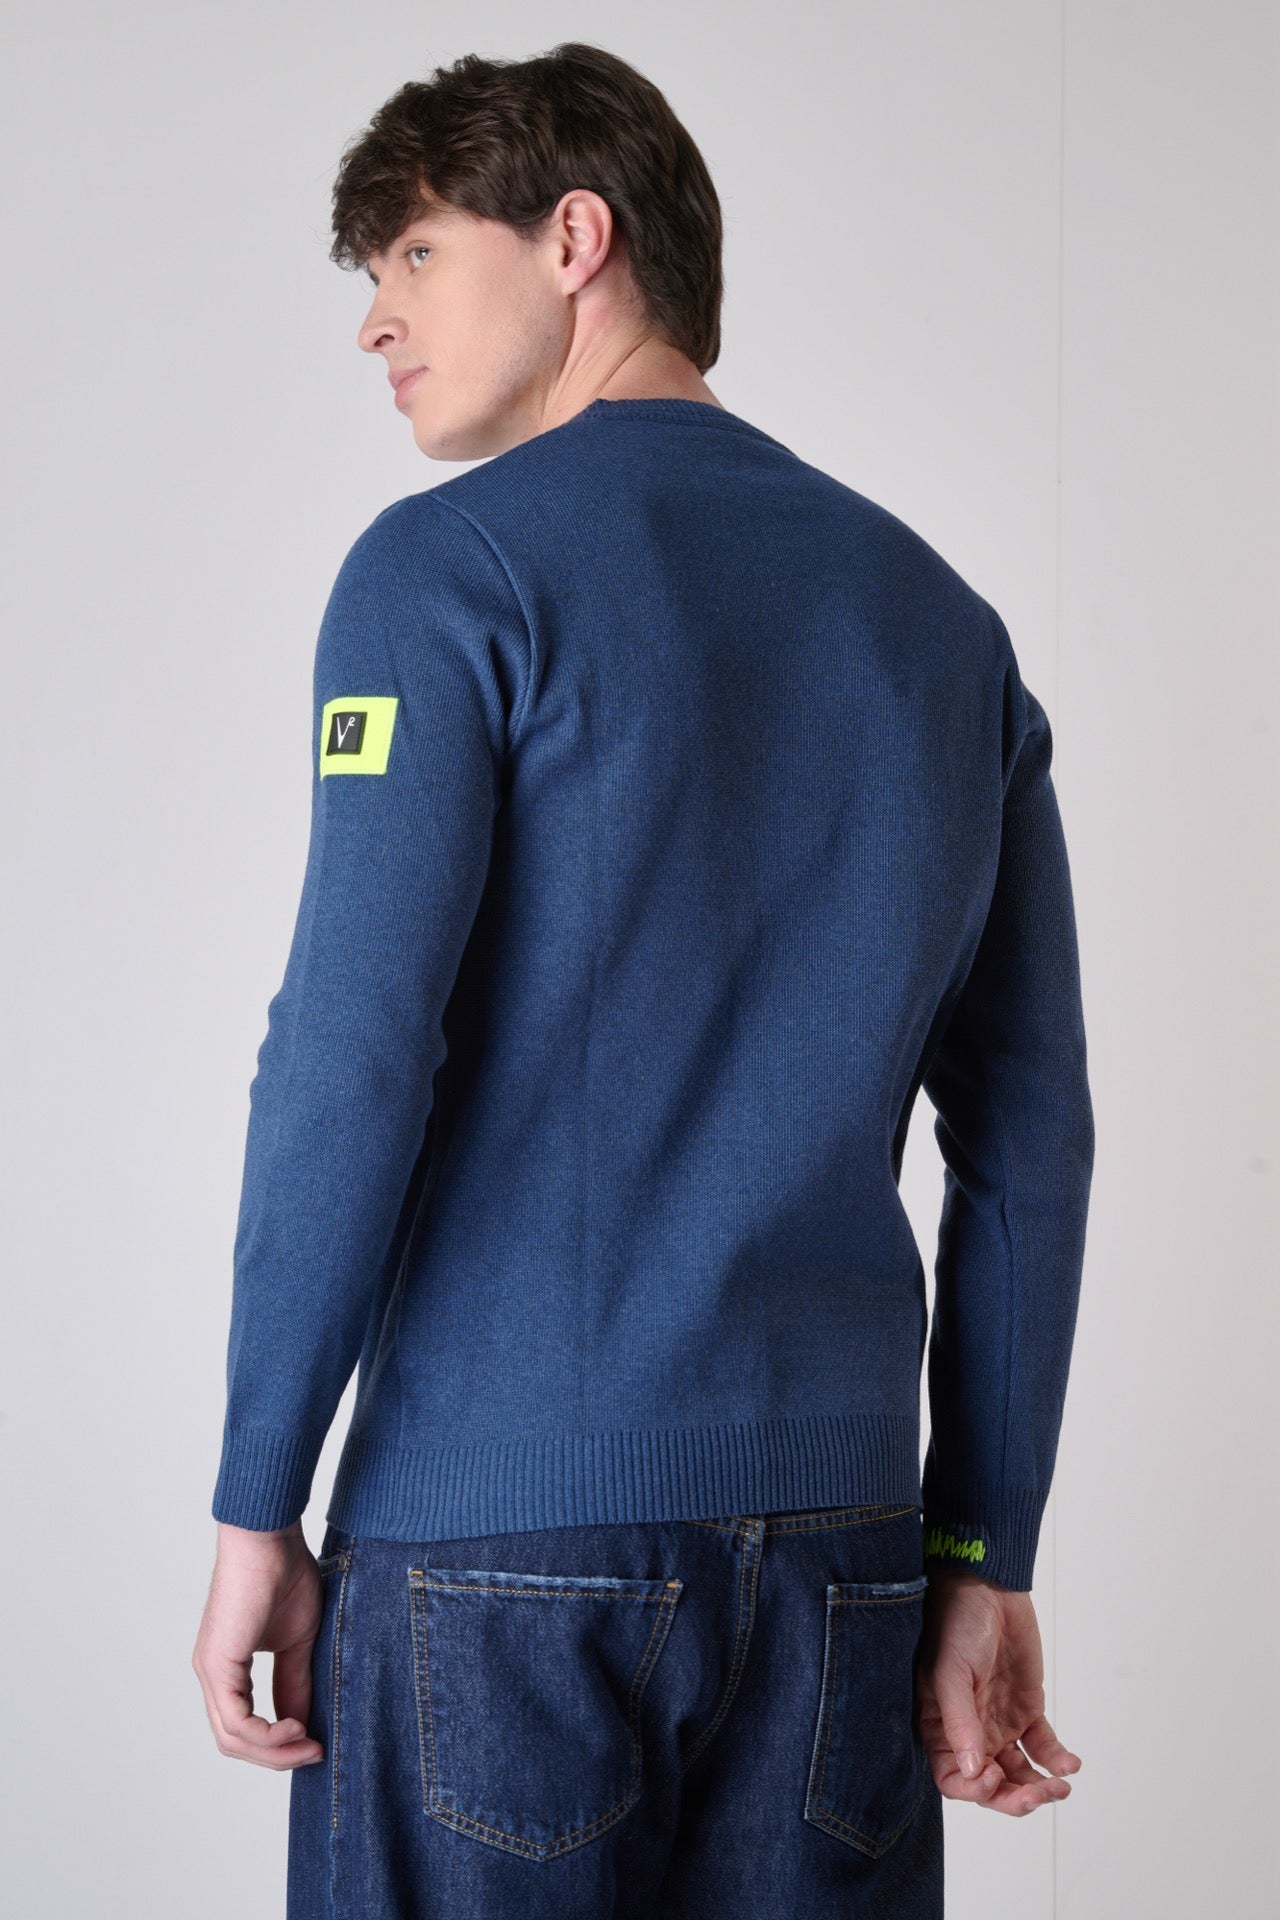 Jeans fabric stitch sweater with embroidery and V2 patch on the arm